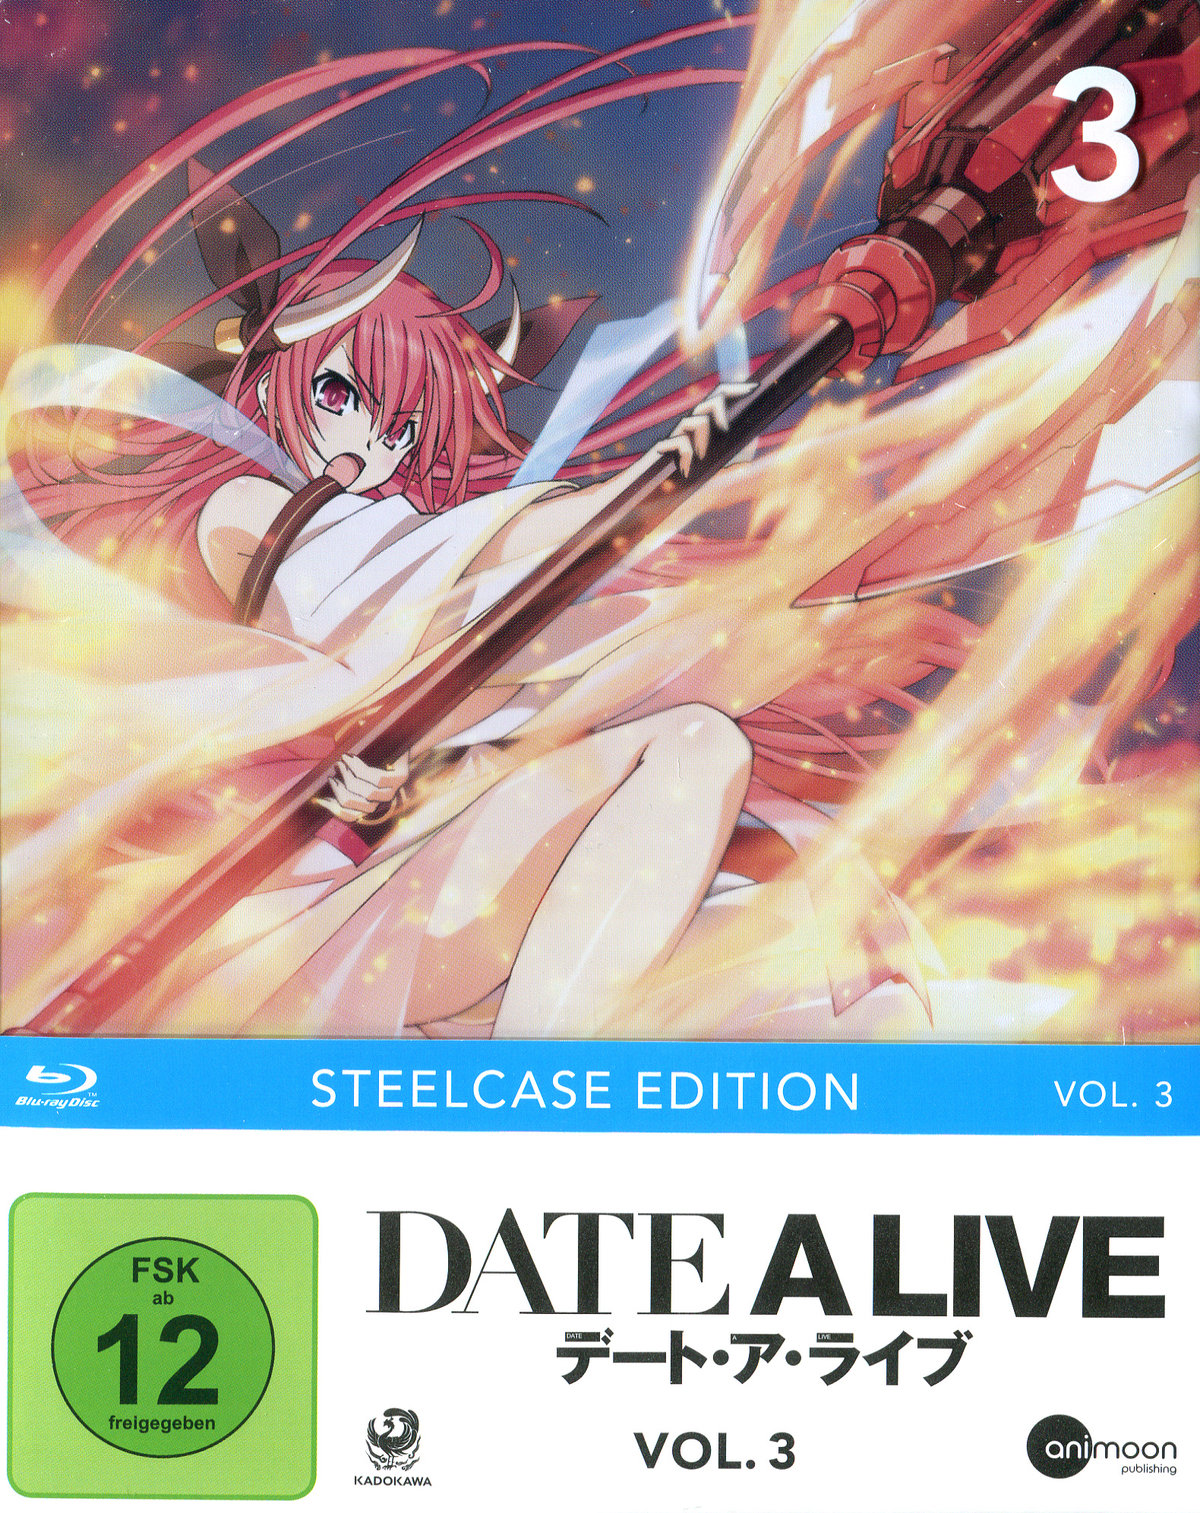 DATE A LIVE Vol.3 (Steelcase Edition) [Blu-ray] von Animoon Publishing (Rough Trade Distribution)